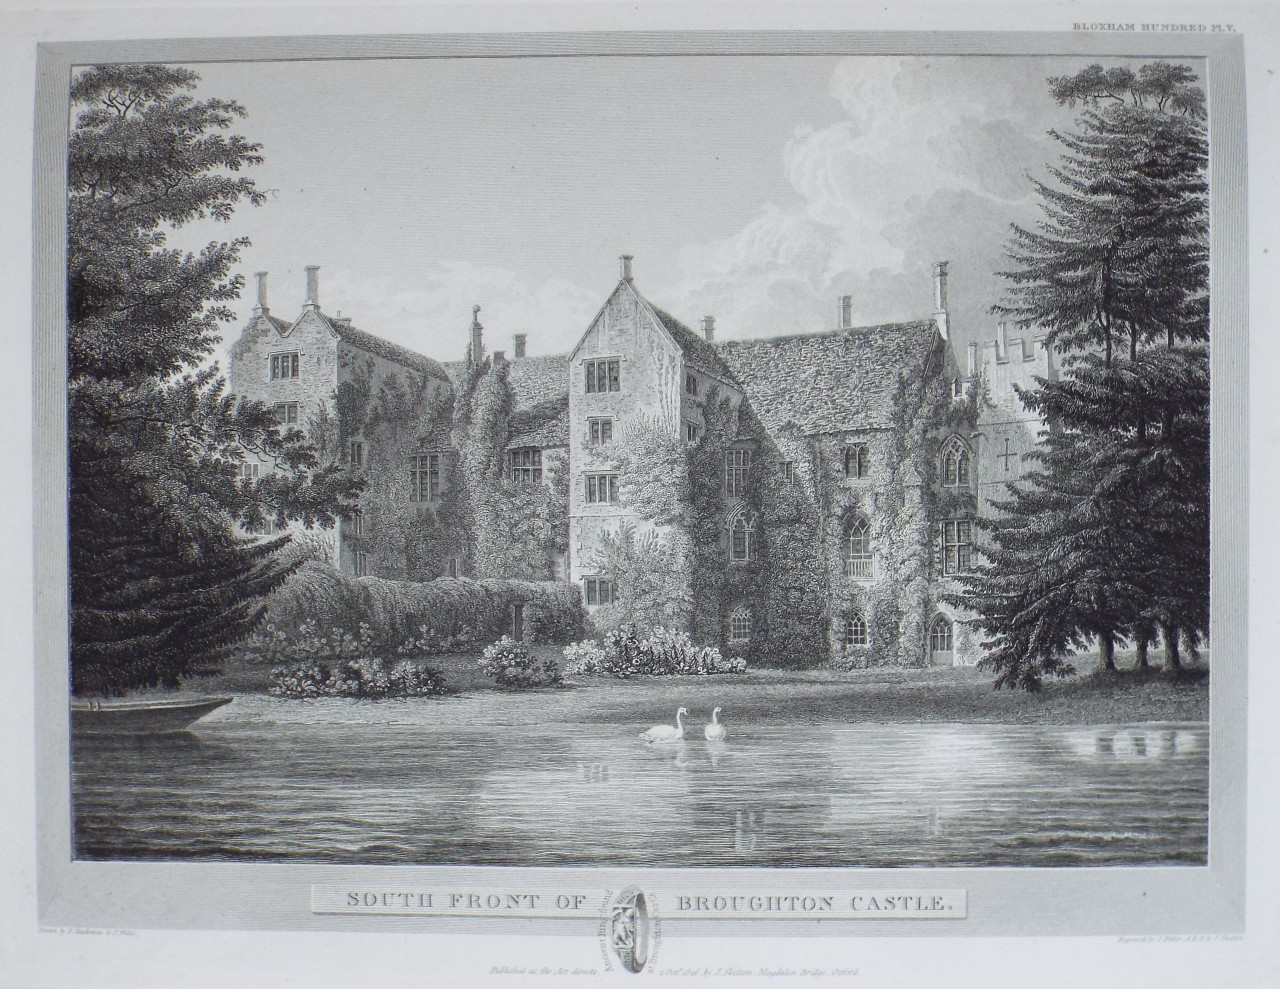 Print - South Front of Broughton Castle. - Skelton